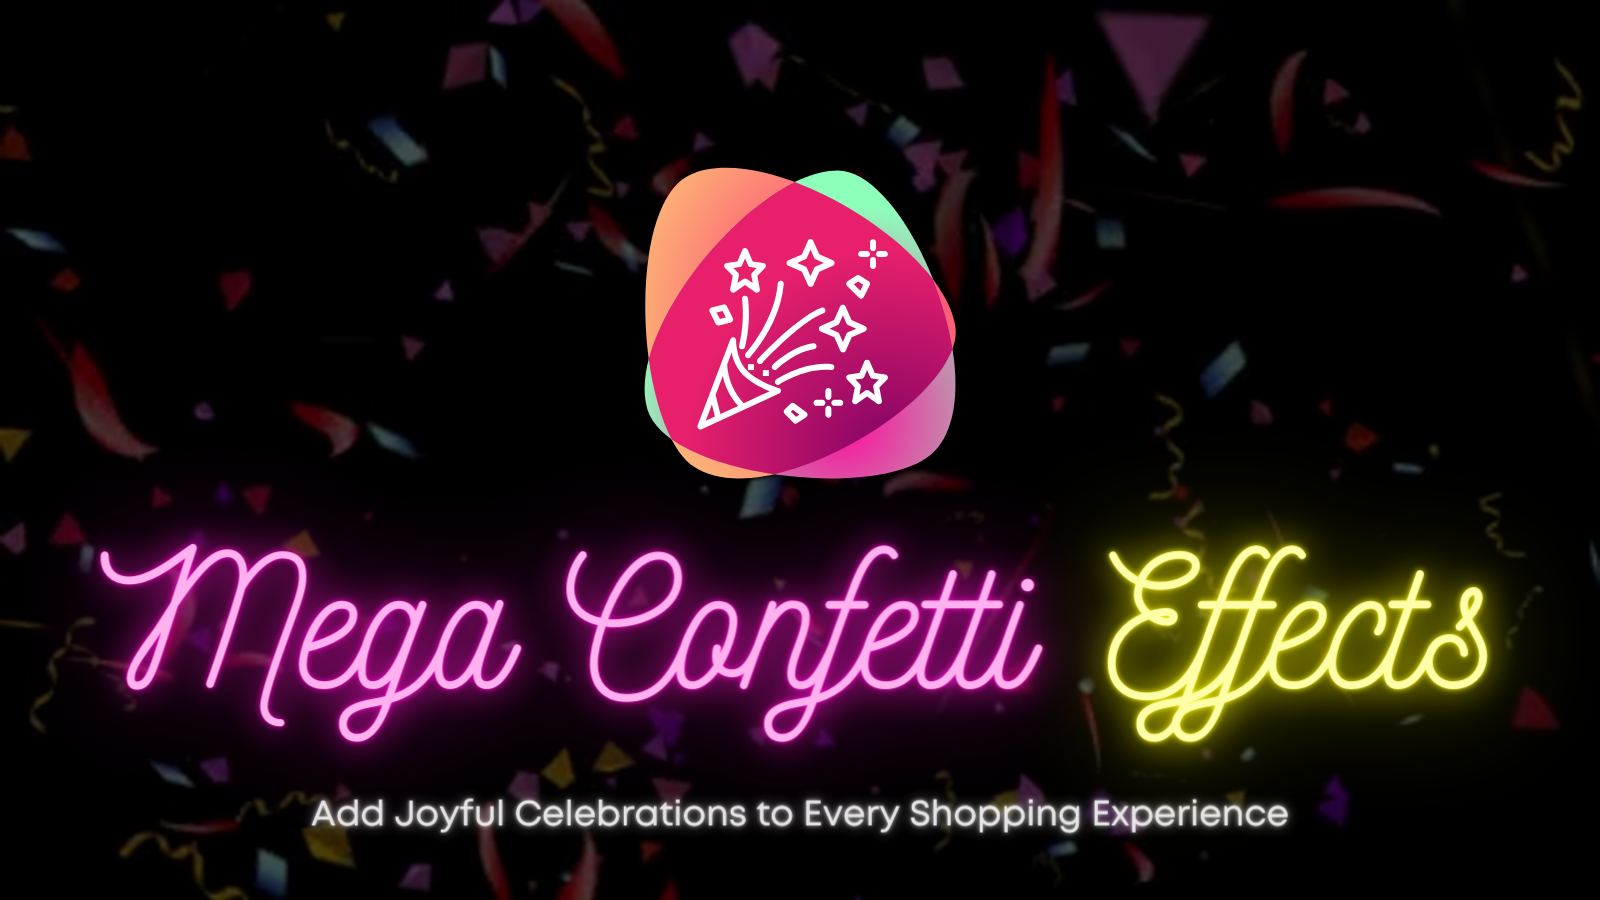 Mega Confetti Effects Enchant your store with dazzling confetti!